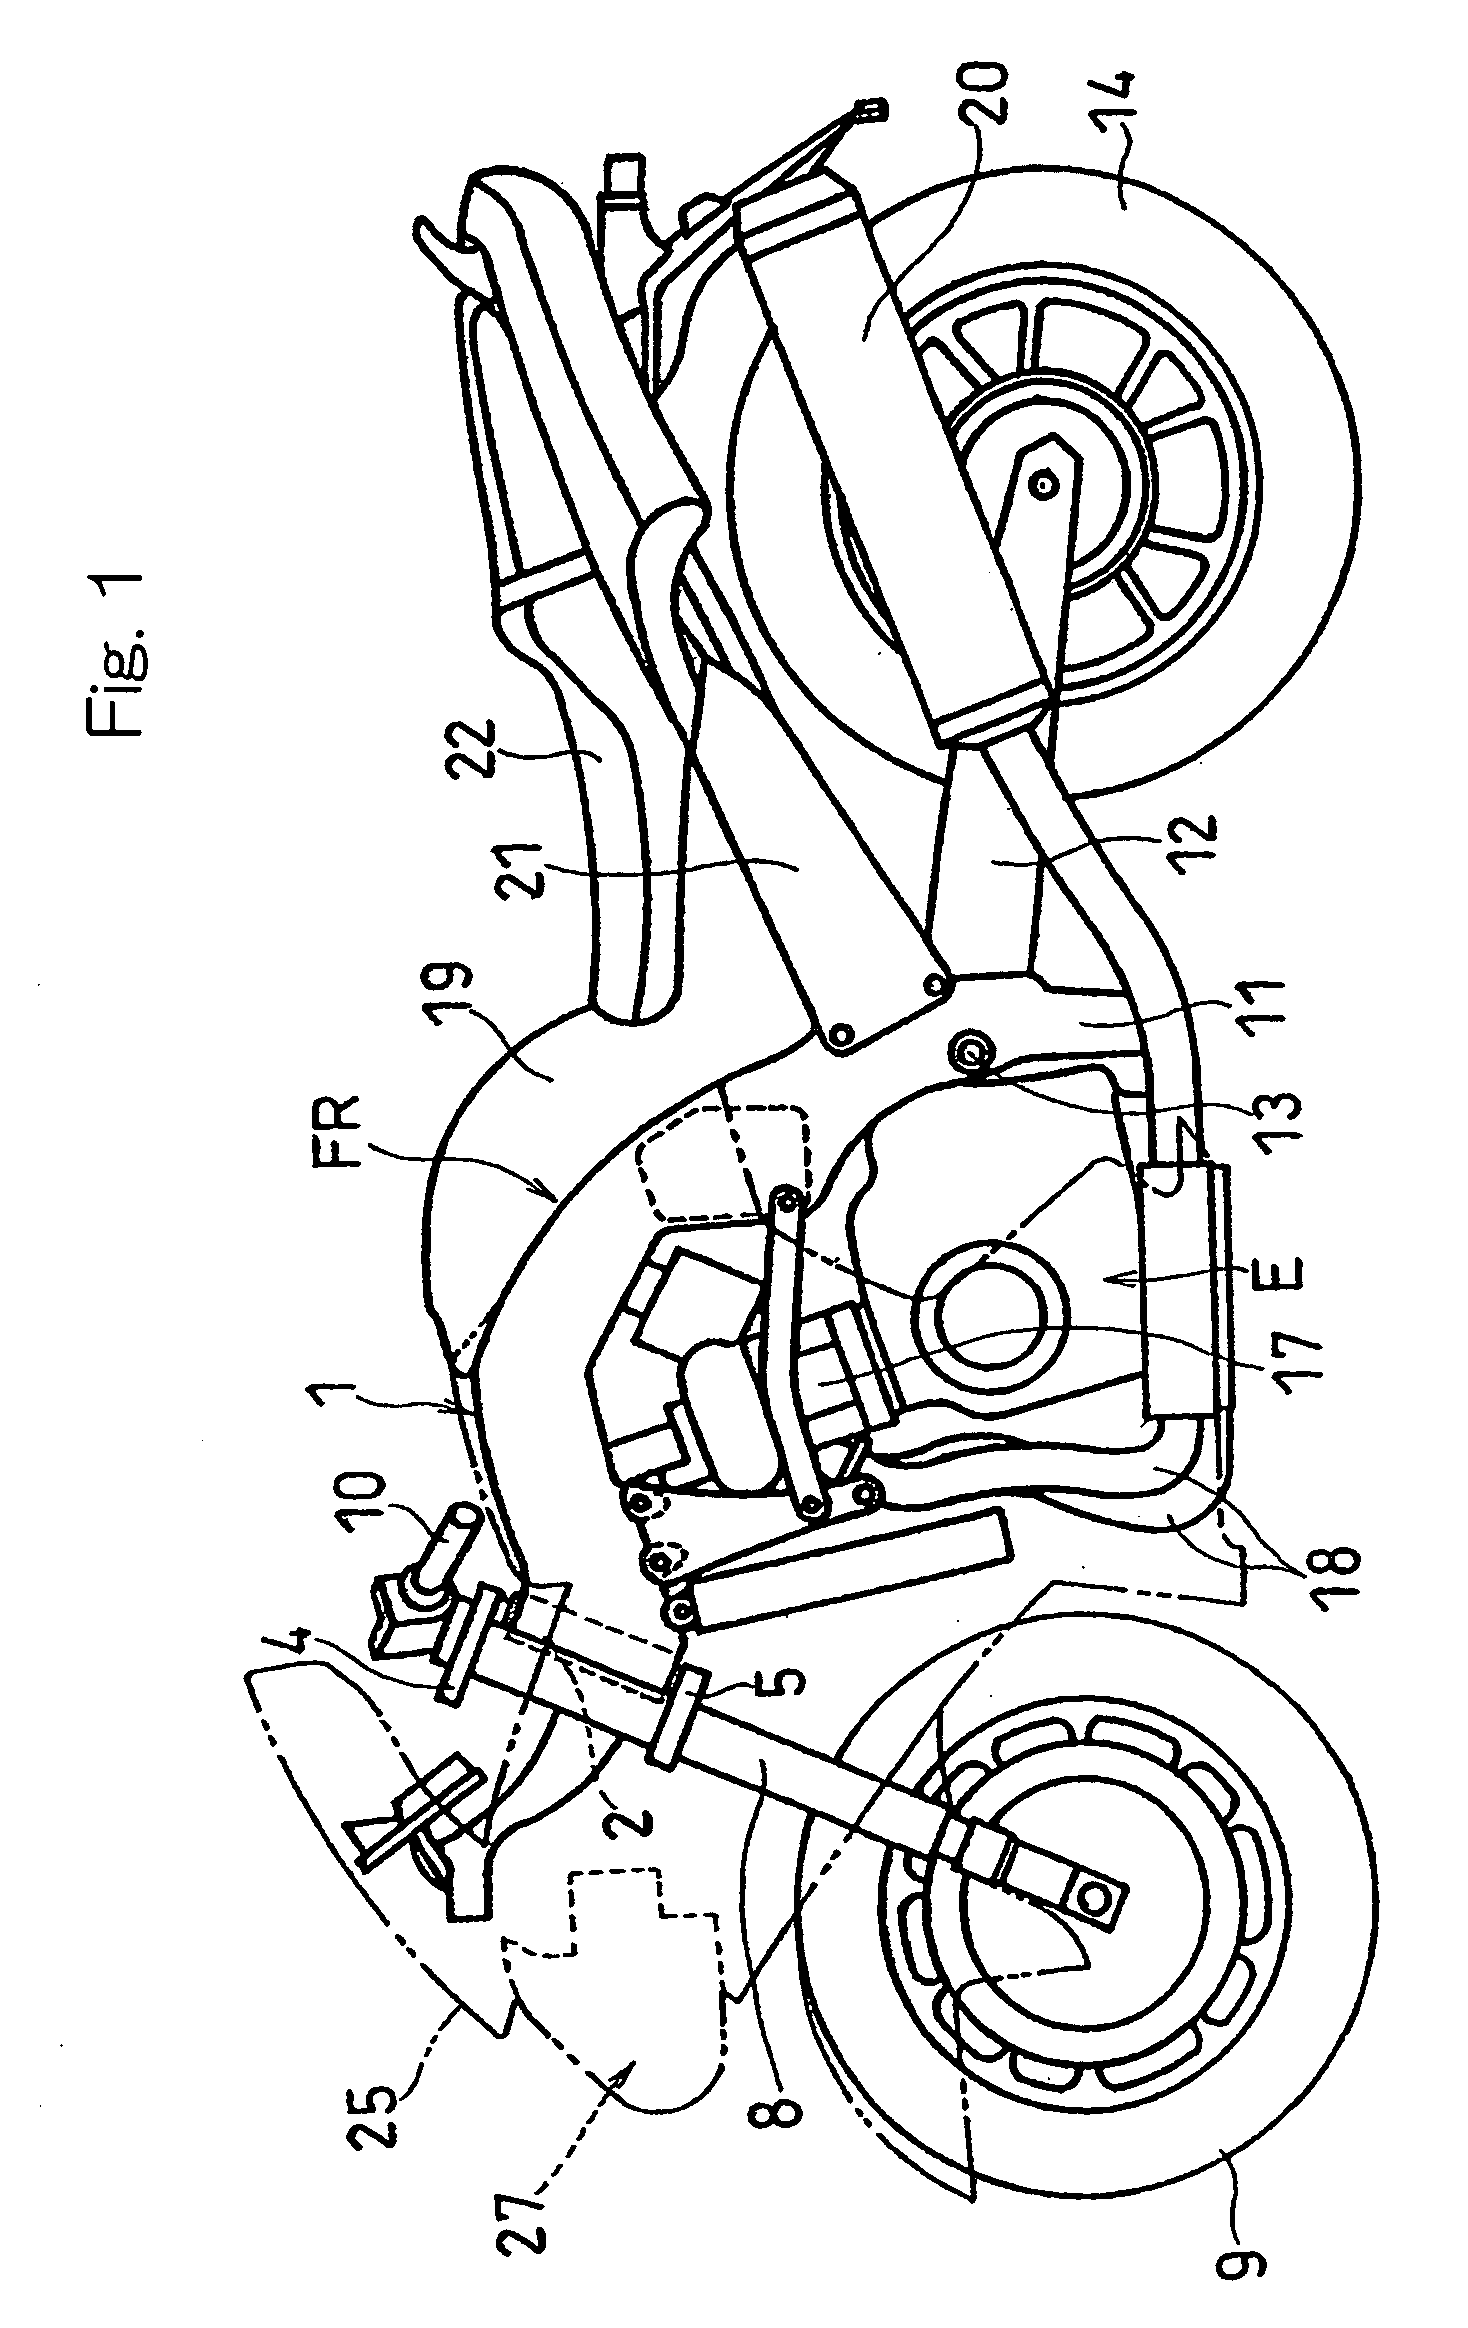 Vehicle headlight assembly and motorcycle utilizing the same